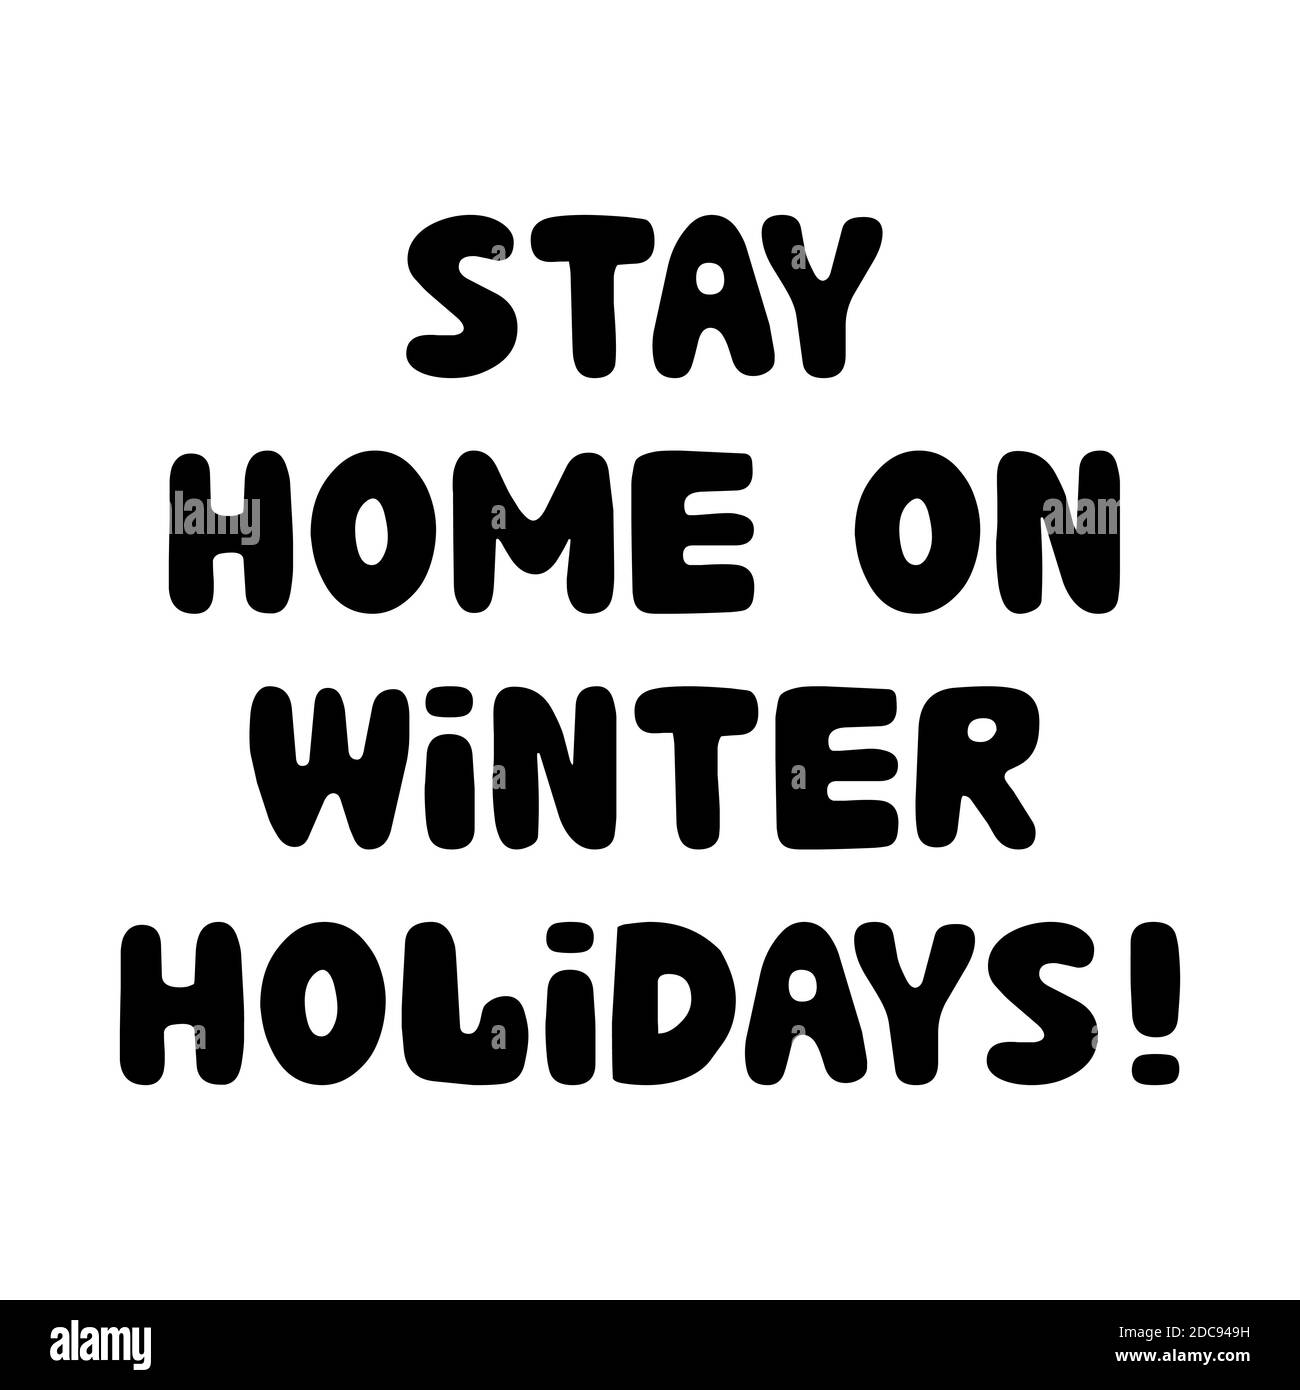 Stay home on winter holidays, hand drawn lettering isolated on white. Stock Vector